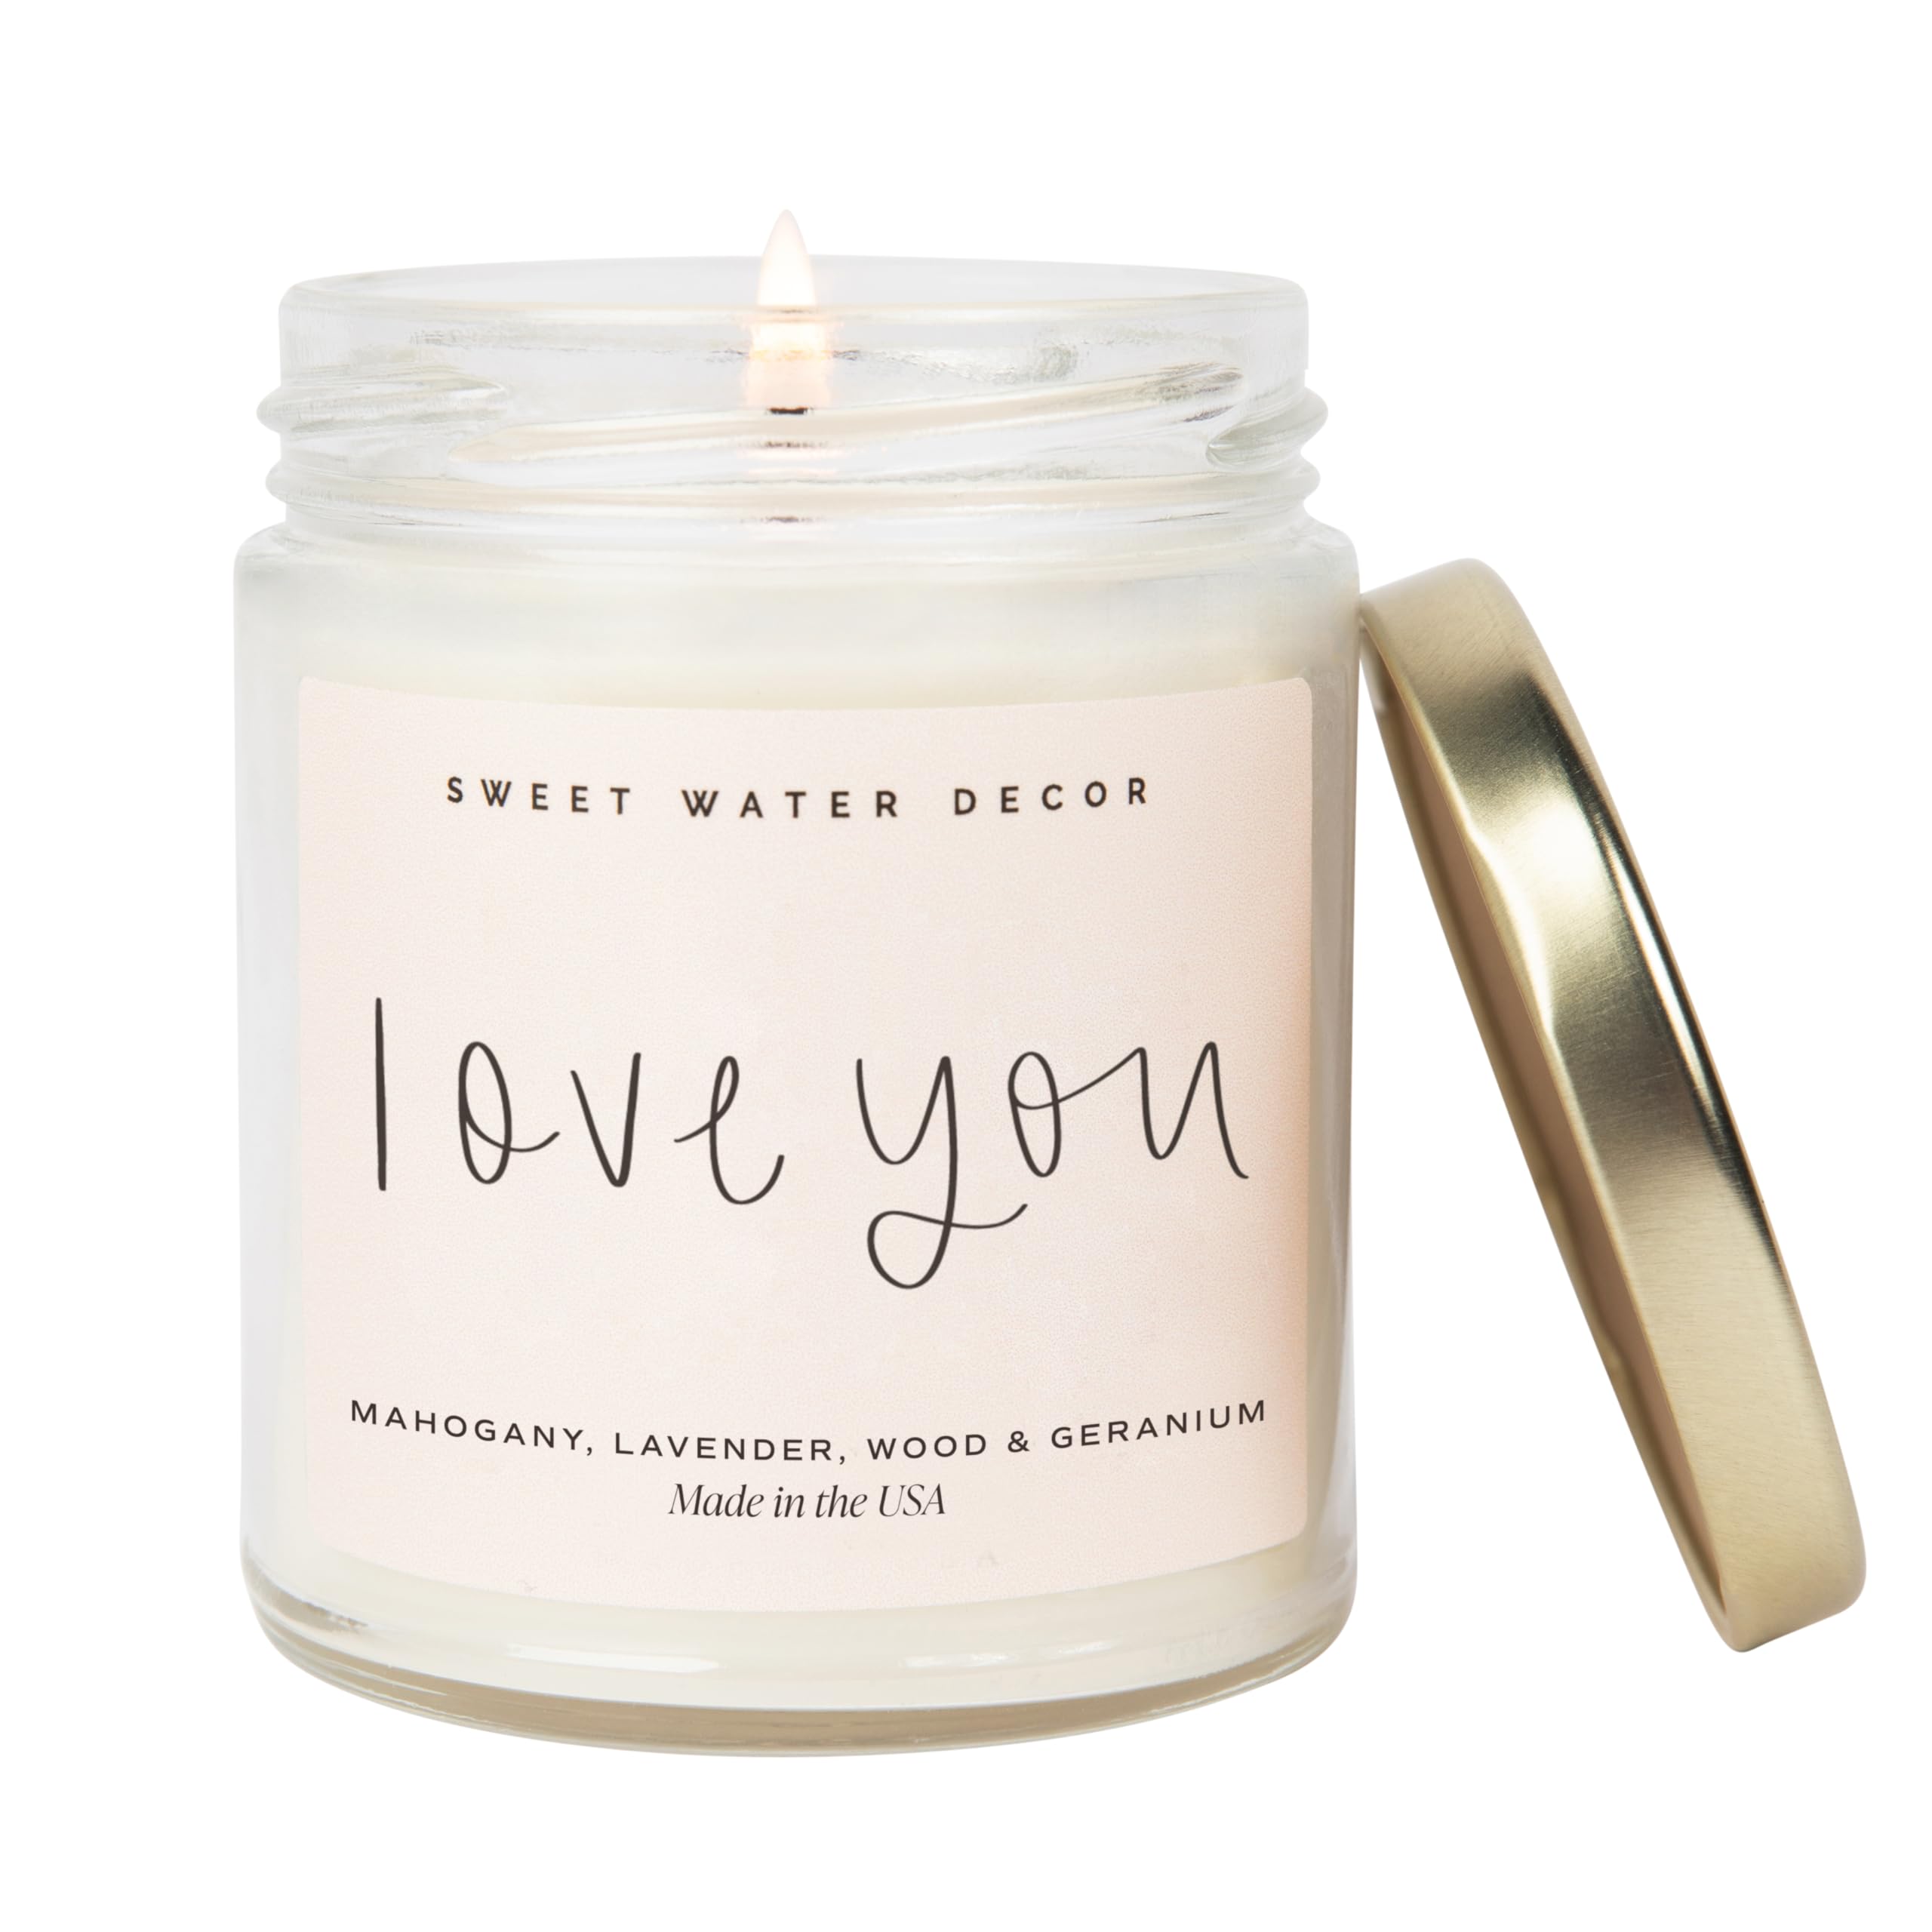 Sweet Water Decor, Love You Candle - Fresh Lavender, Mahogany, Geranium, and Wood Scented Candles for Home - 9oz Clear Jar + Gold Lid, 40+ Hour Burn Time, Made in the USA - Valentine's Day Candles